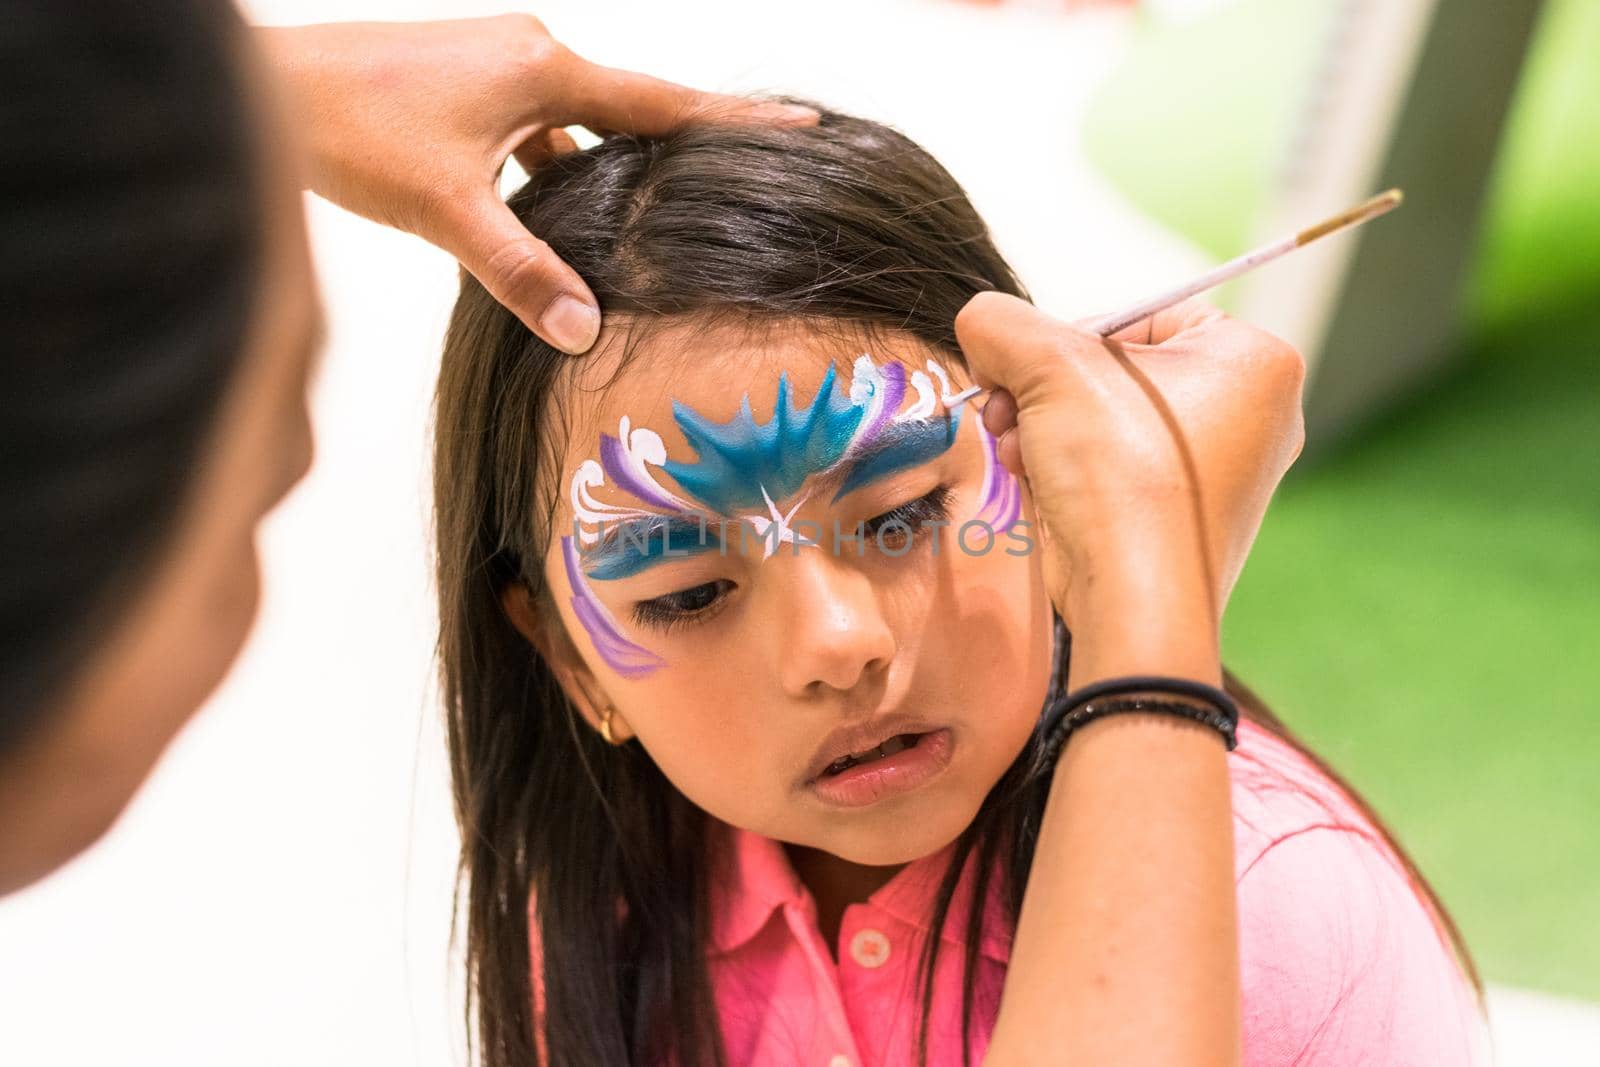 Girl painting her face like a princess by face painting artist. by Peruphotoart